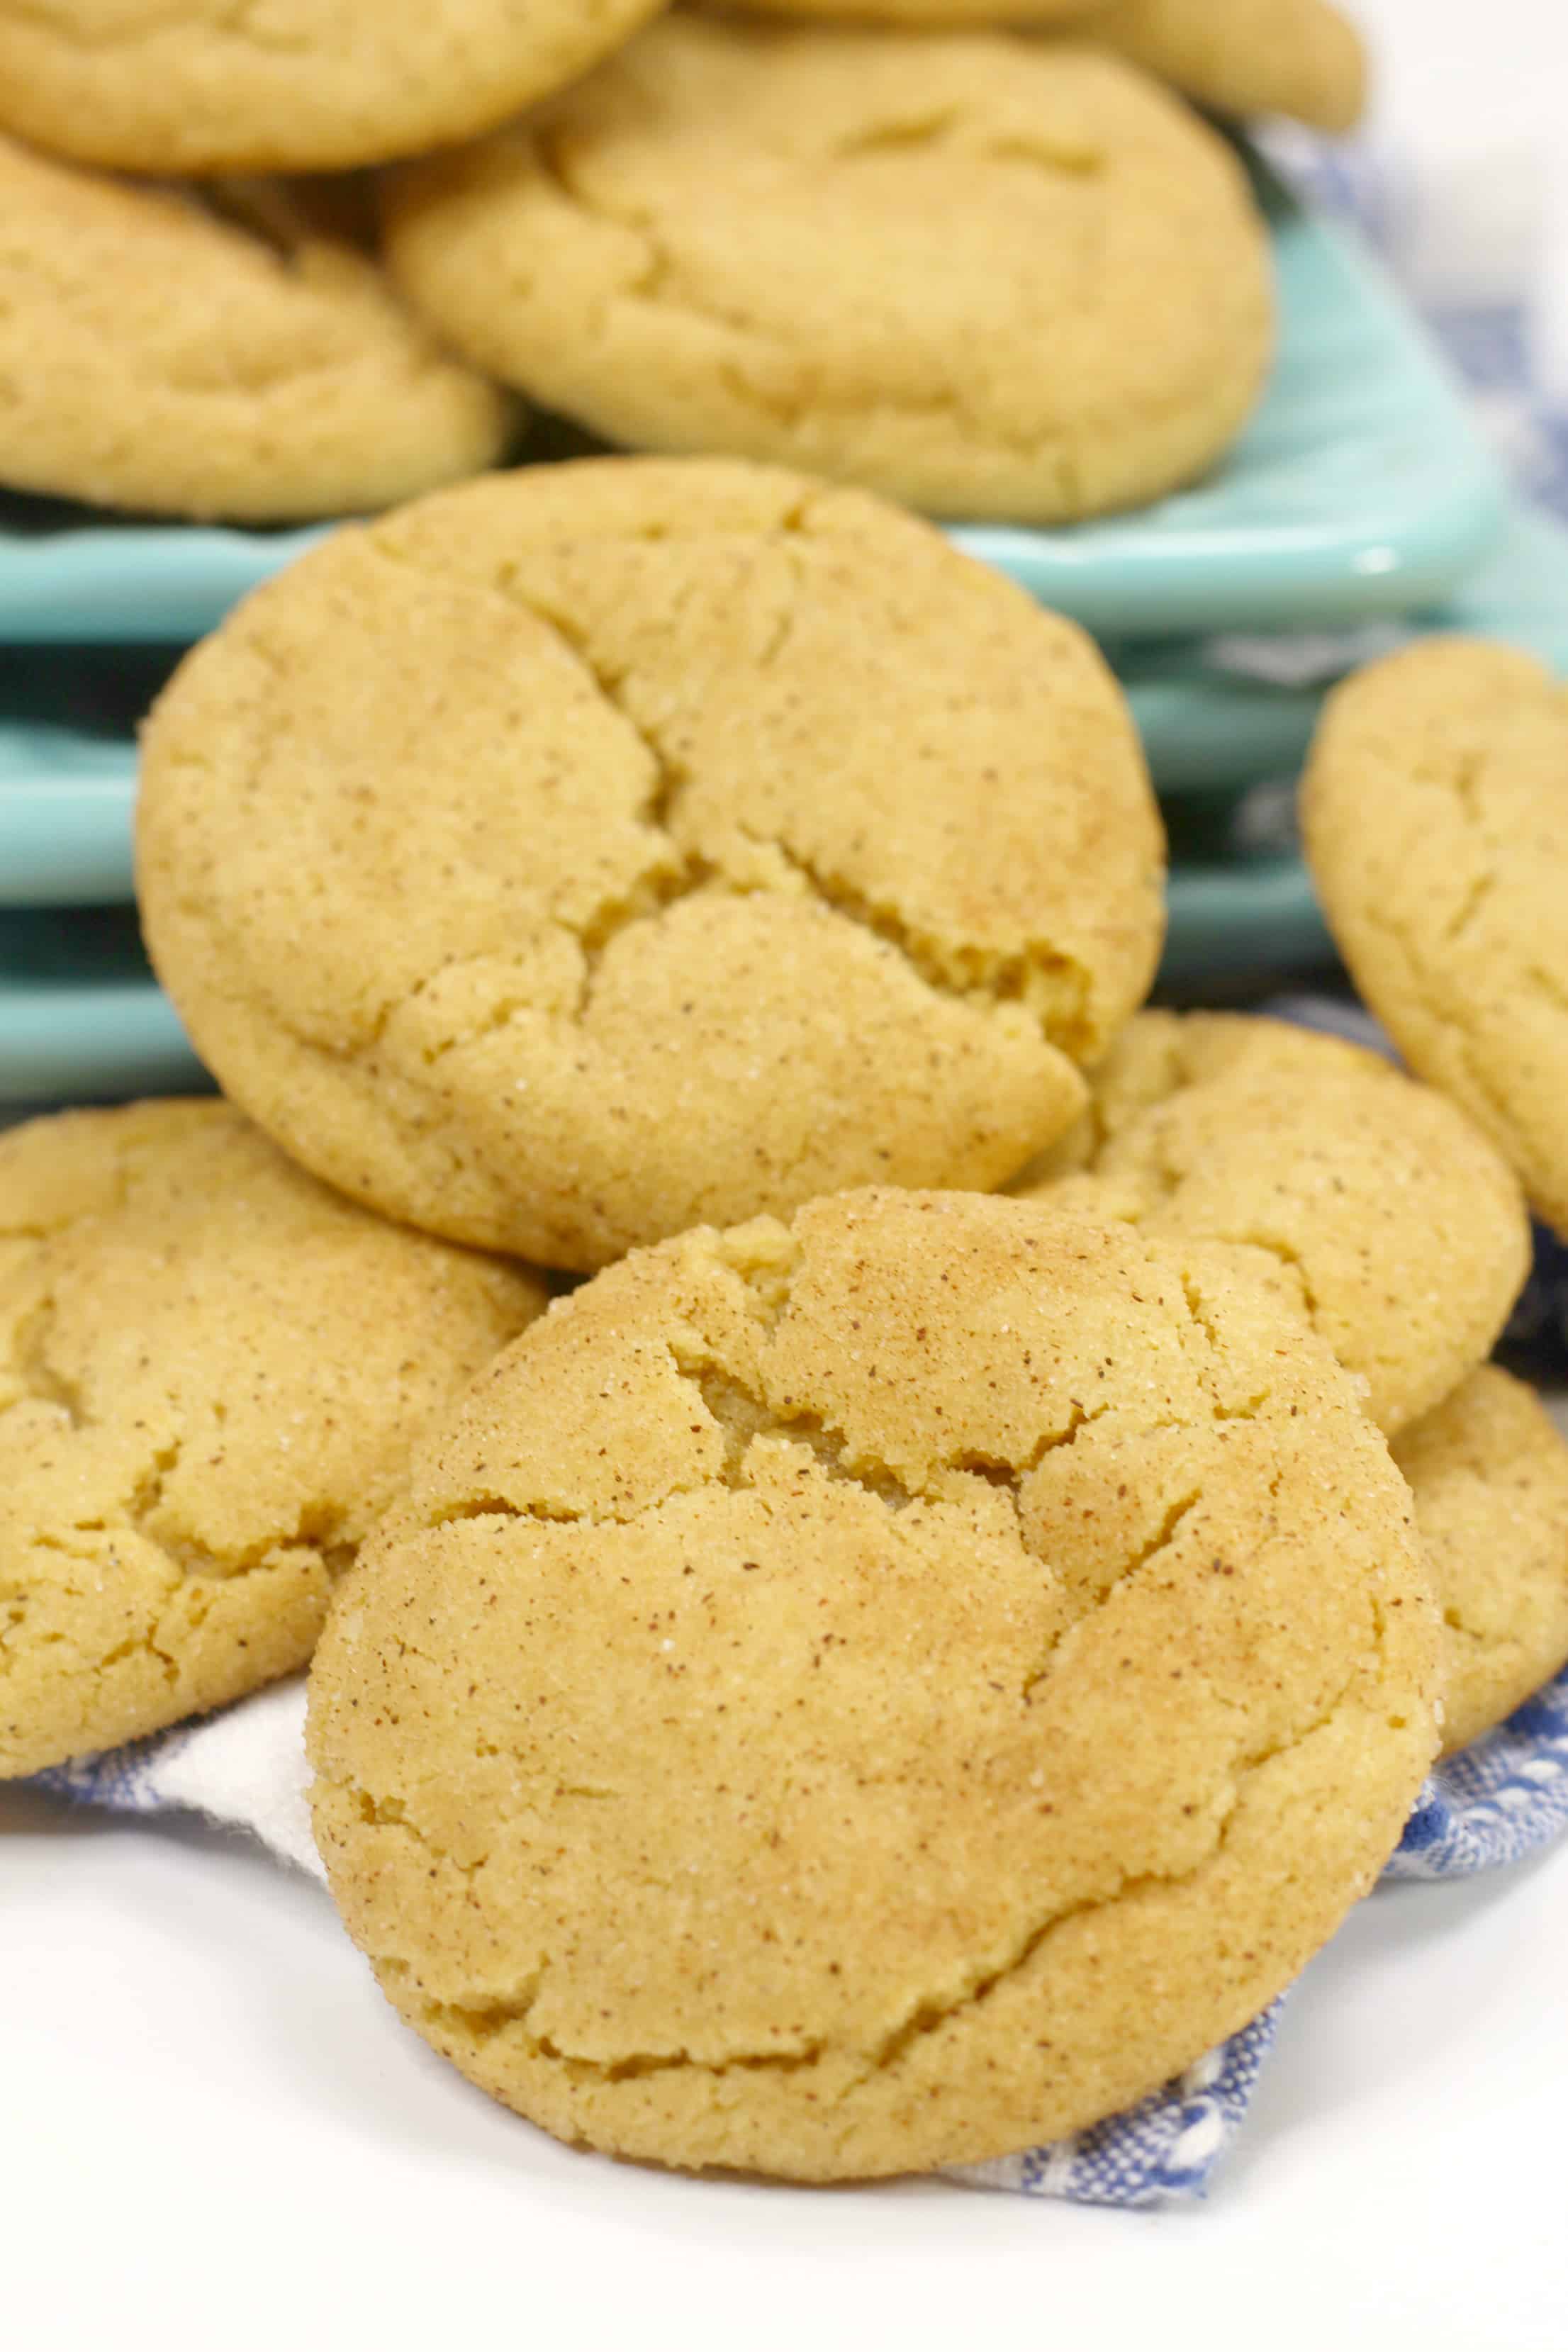 Stacks of Easy snickerdoodle cookies laying on a white surface next to teal plates